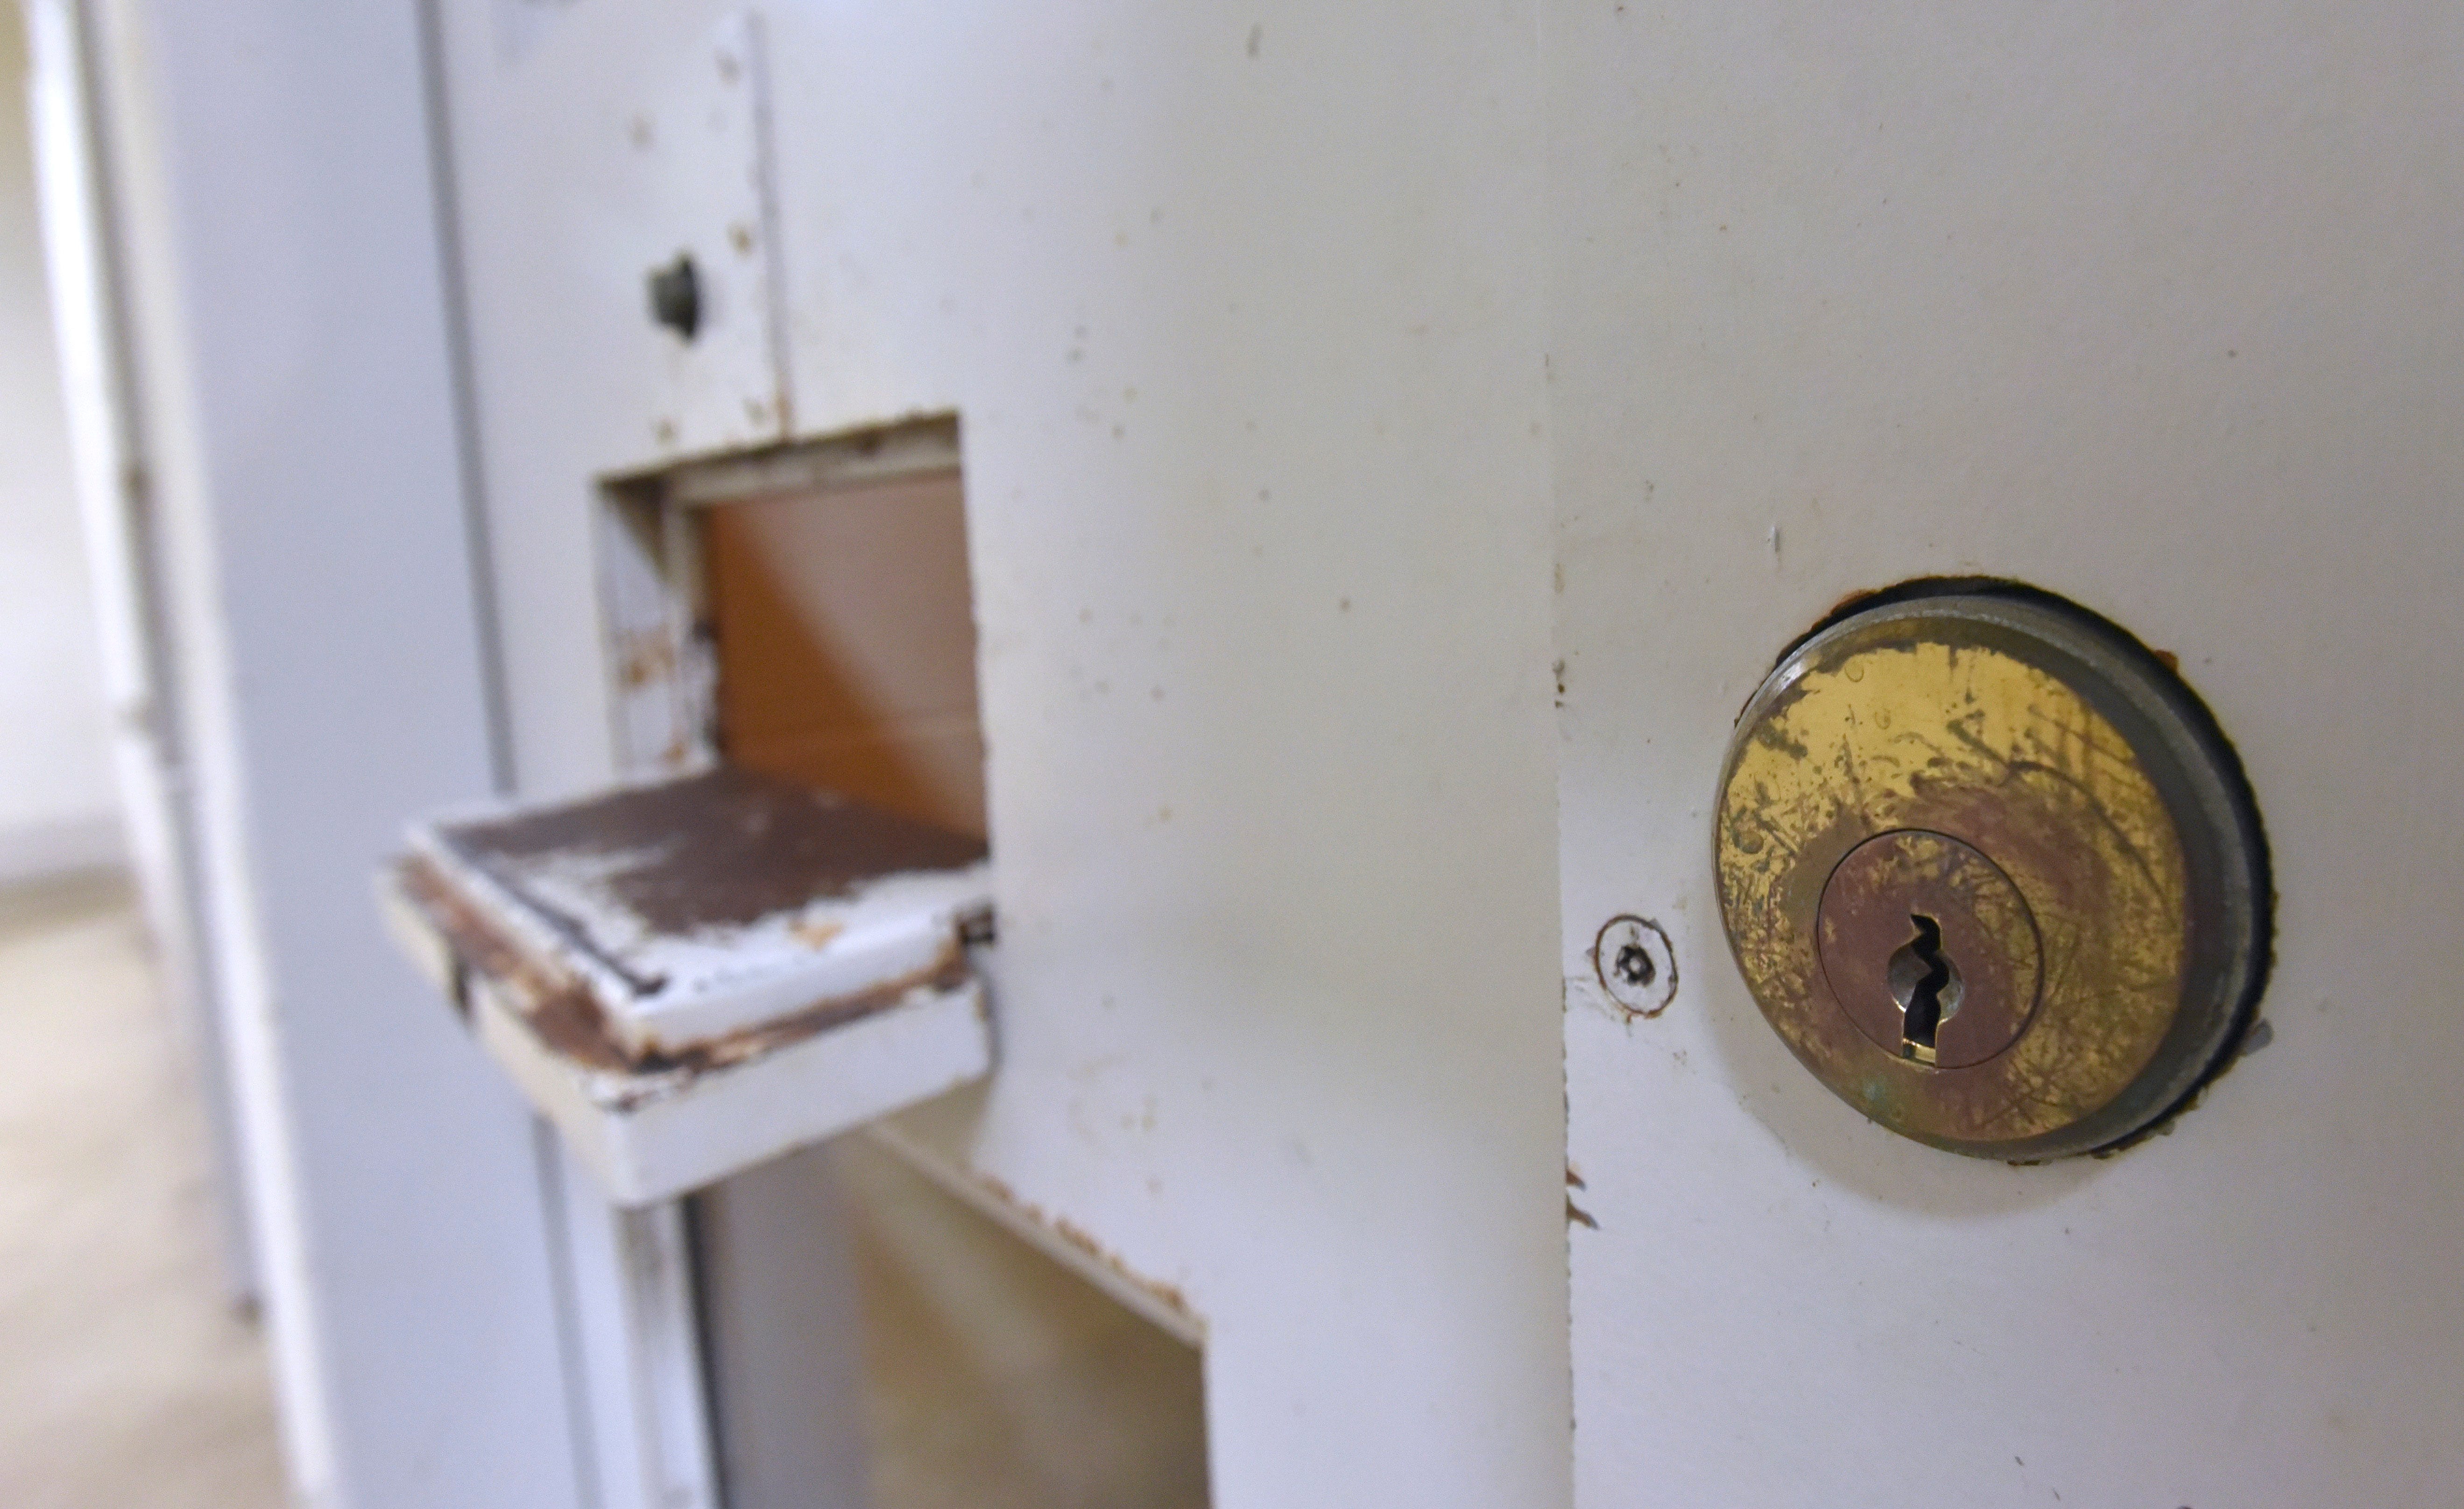 The jail-cell lock is situated near the food/cuff port.